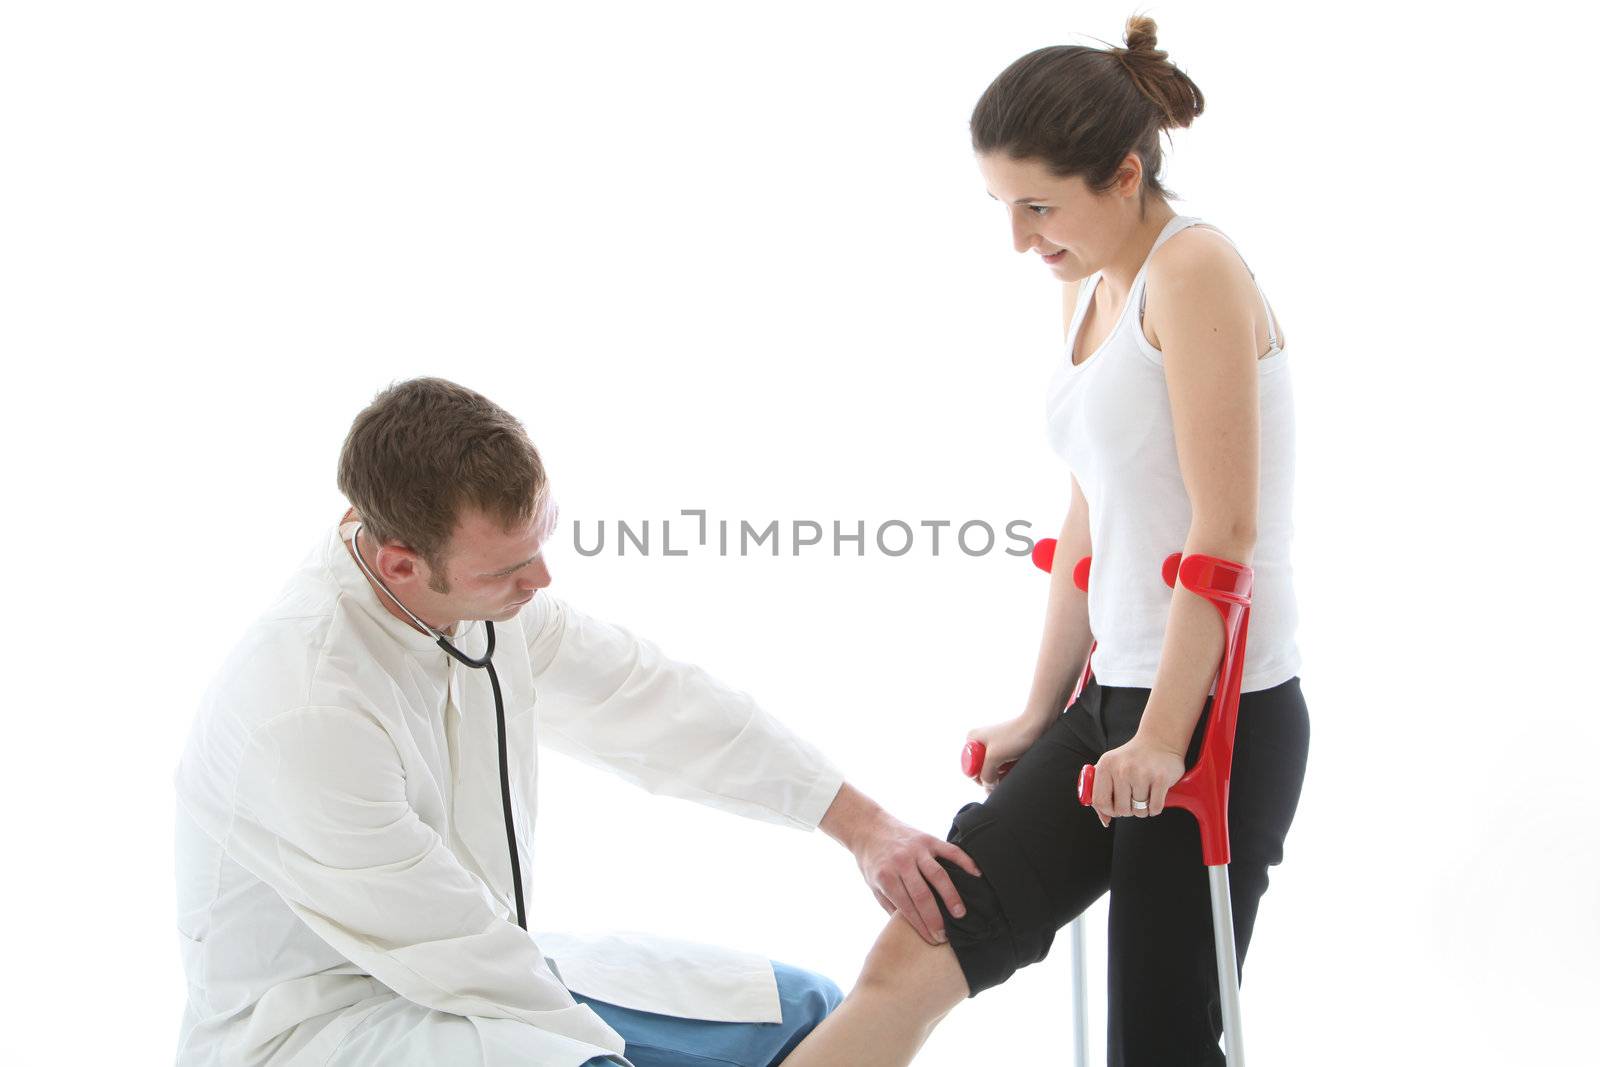 Orthopaedic surgeon examining the knee of a female patient on crutches during a post operative check-up